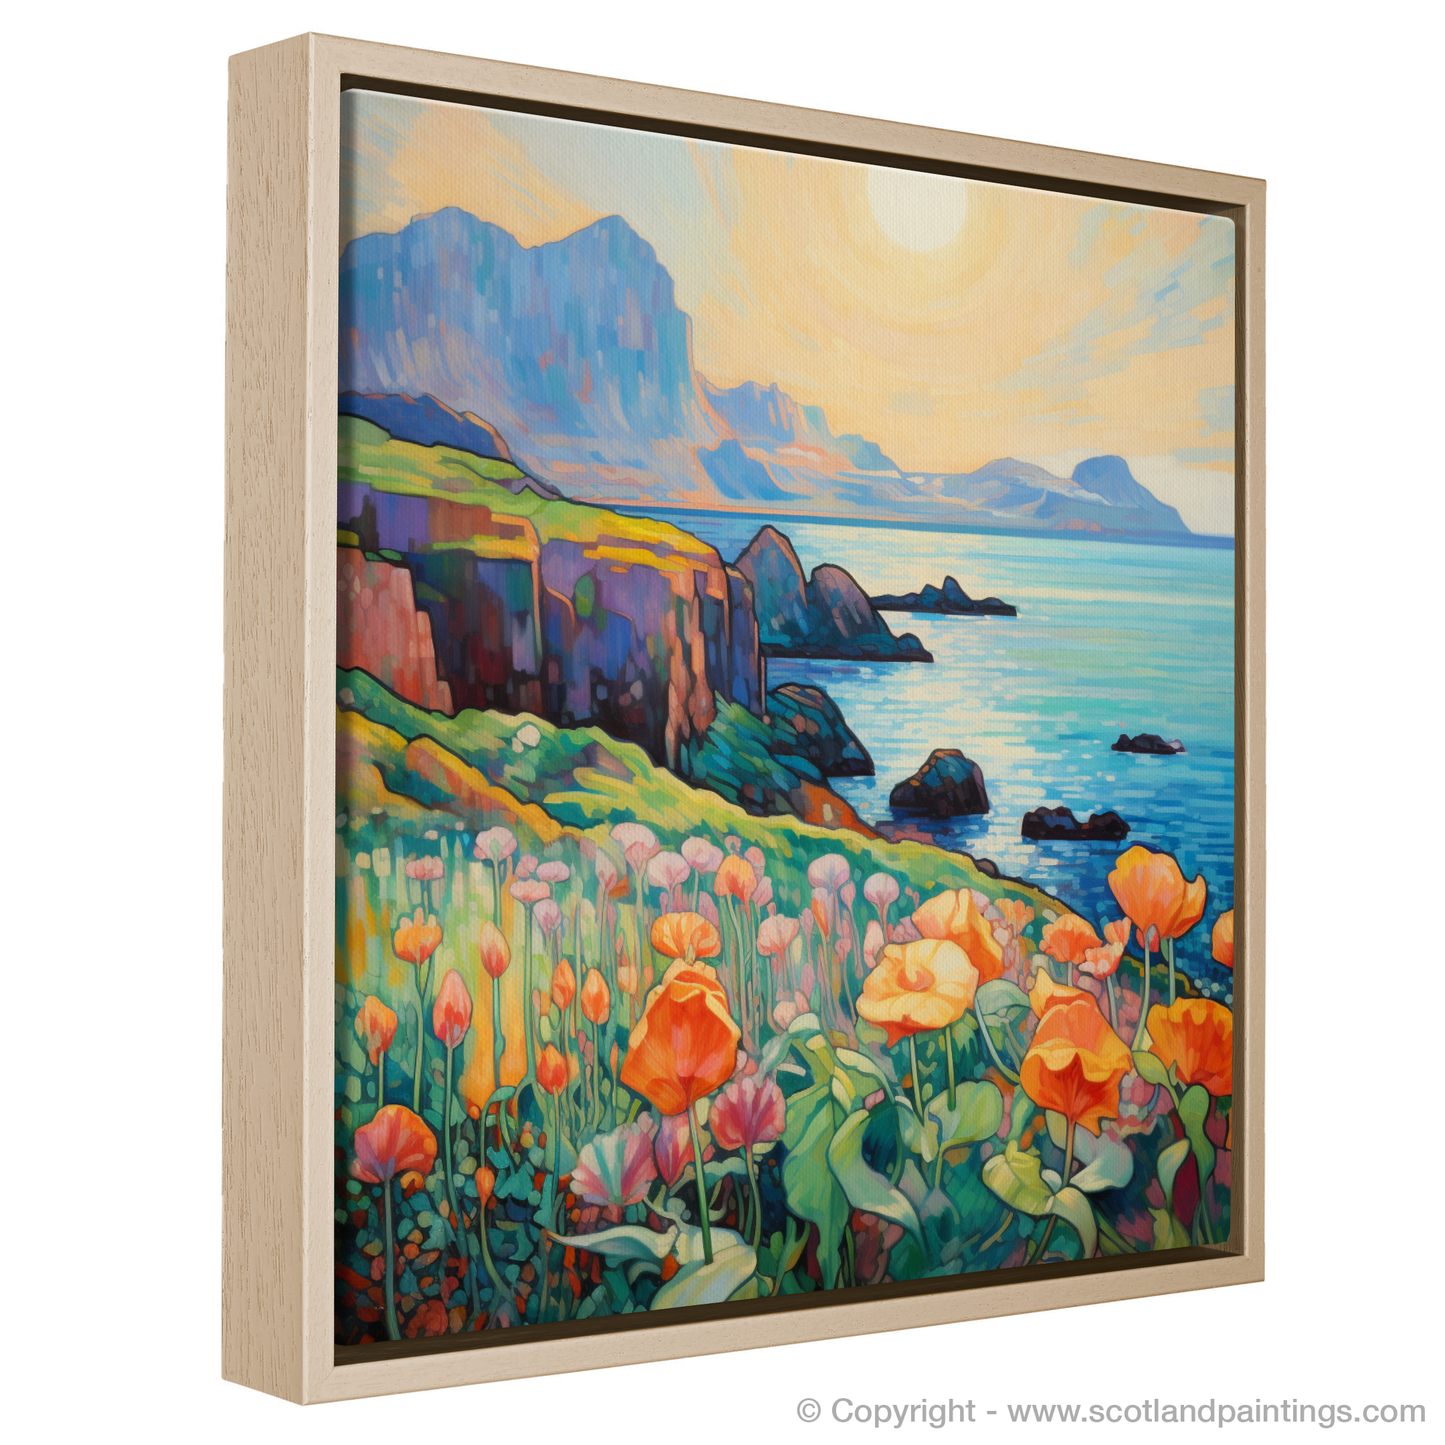 Painting and Art Print of Isle of Canna, Inner Hebrides in summer entitled "Summer Serenade on the Isle of Canna".